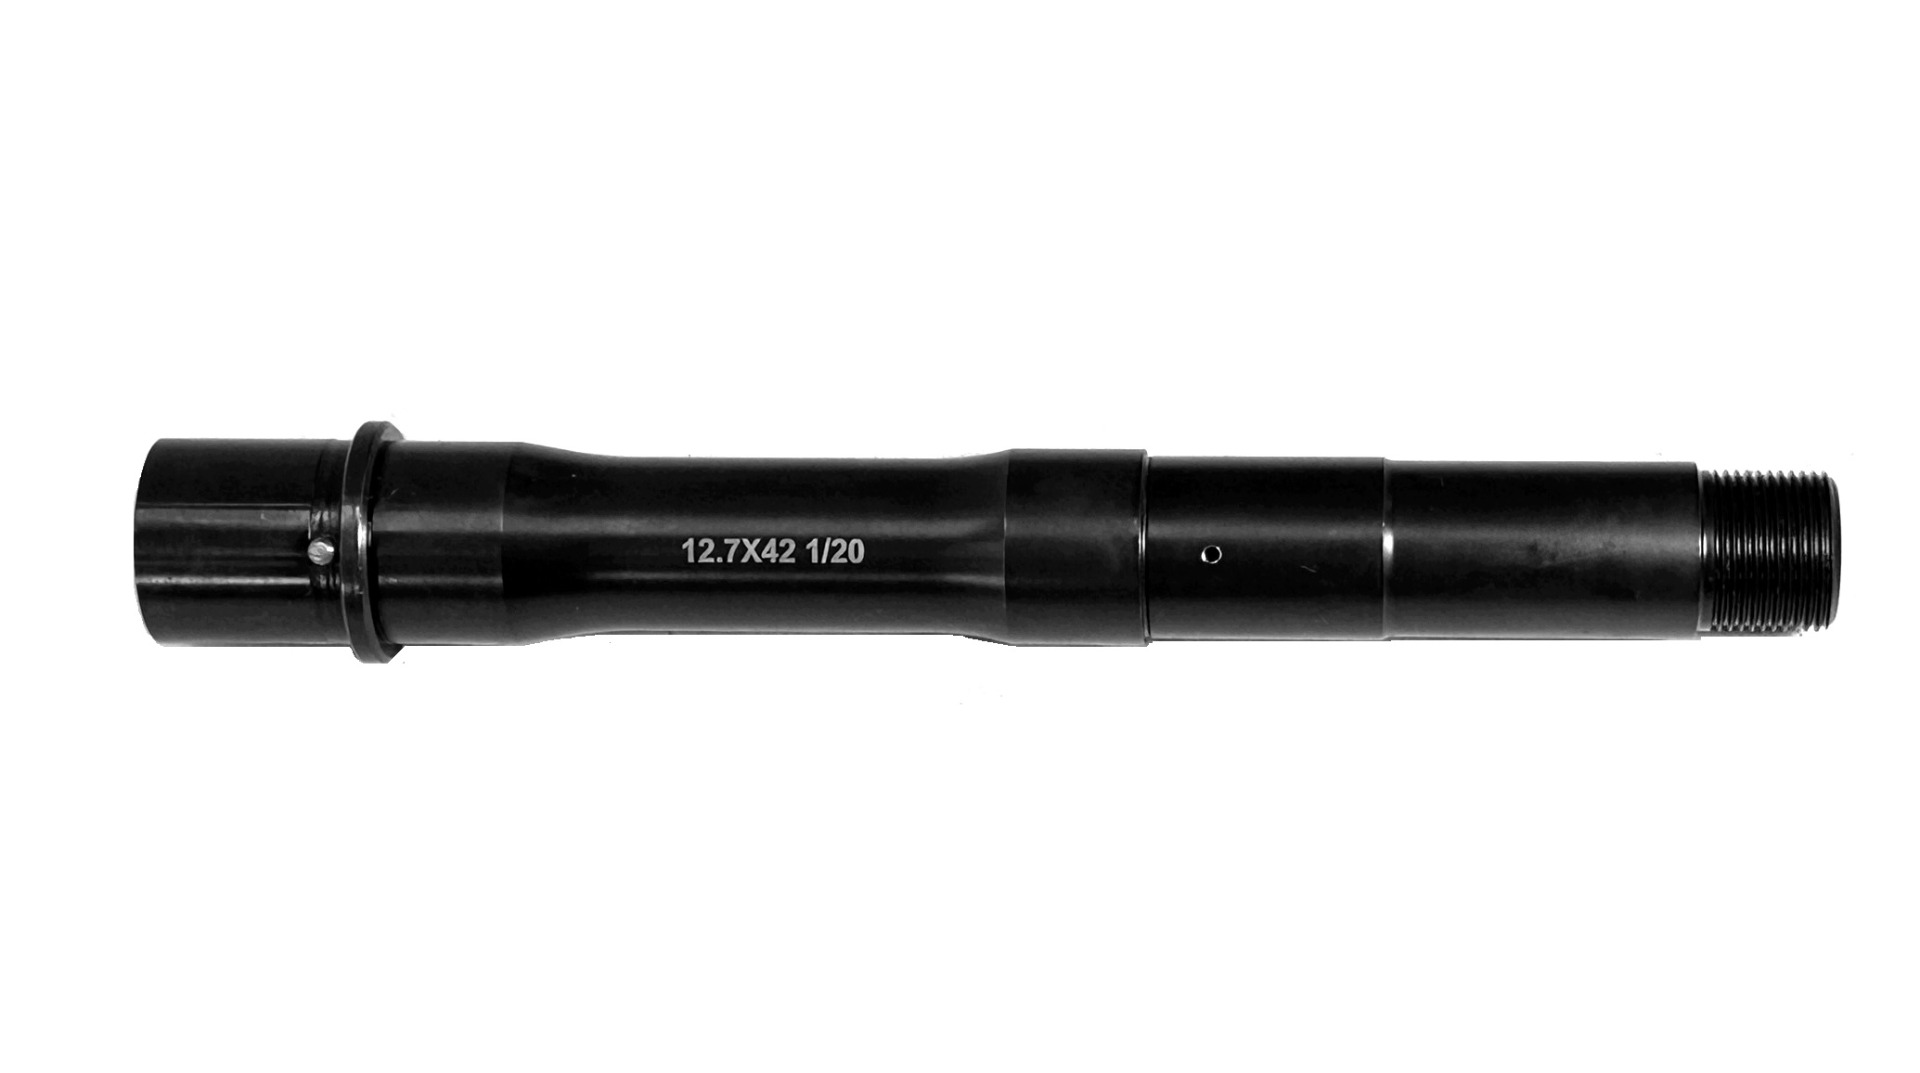 10.5 inch 50 Beowulf AR-15 Barrel | Pro2A Tactical 